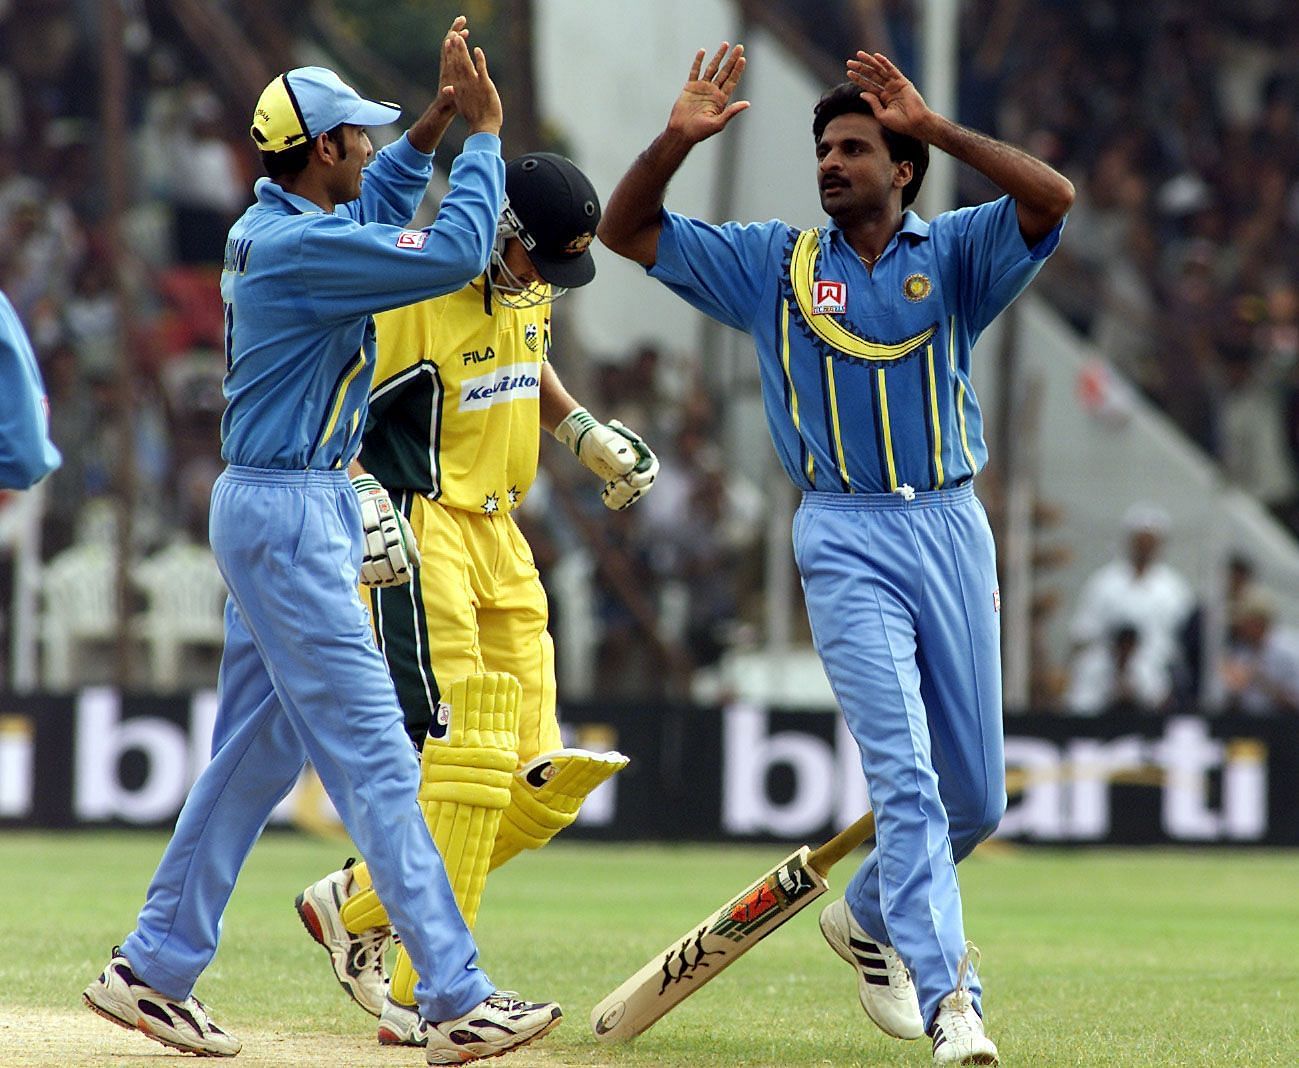 Javagal Srinath led the pace attack.